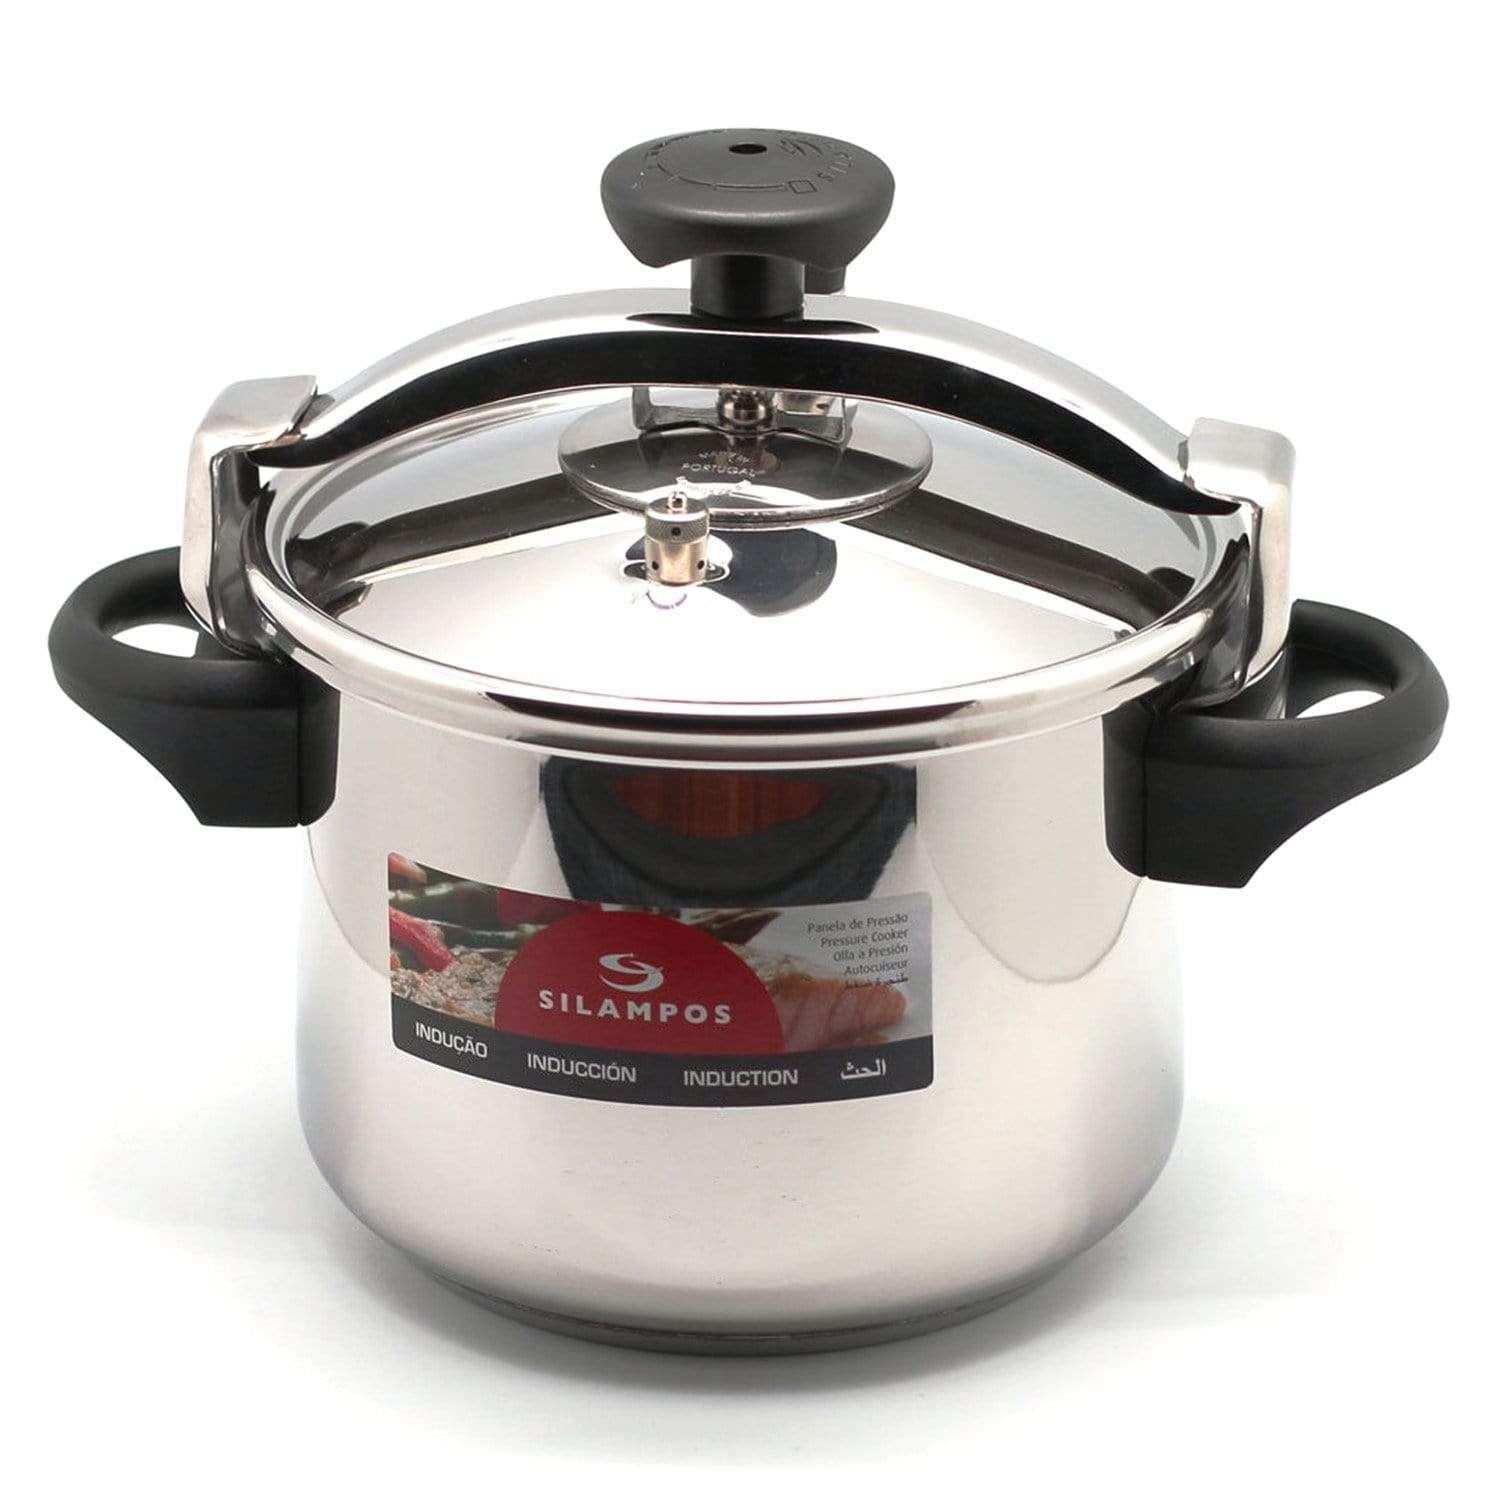 Silampos Pressure Cooker with Basket - Silver, 6L - 641122018660B - Jashanmal Home